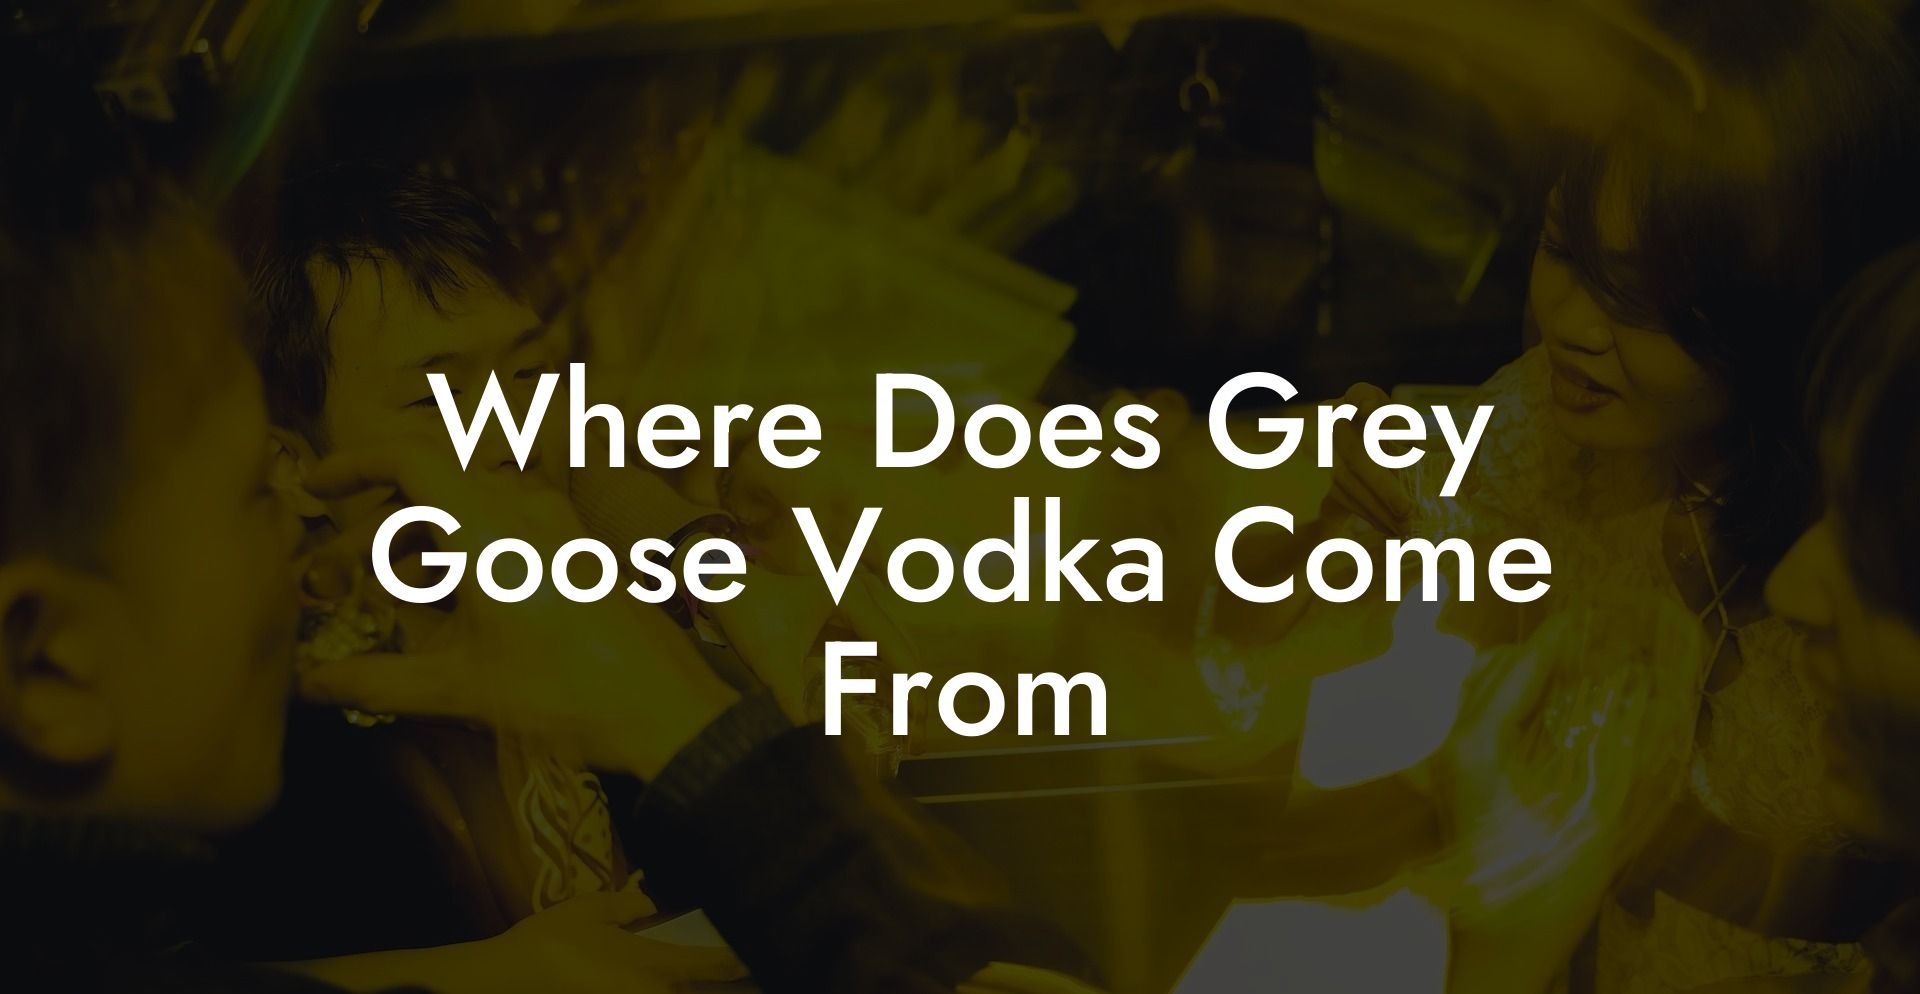 Where Does Grey Goose Vodka Come From